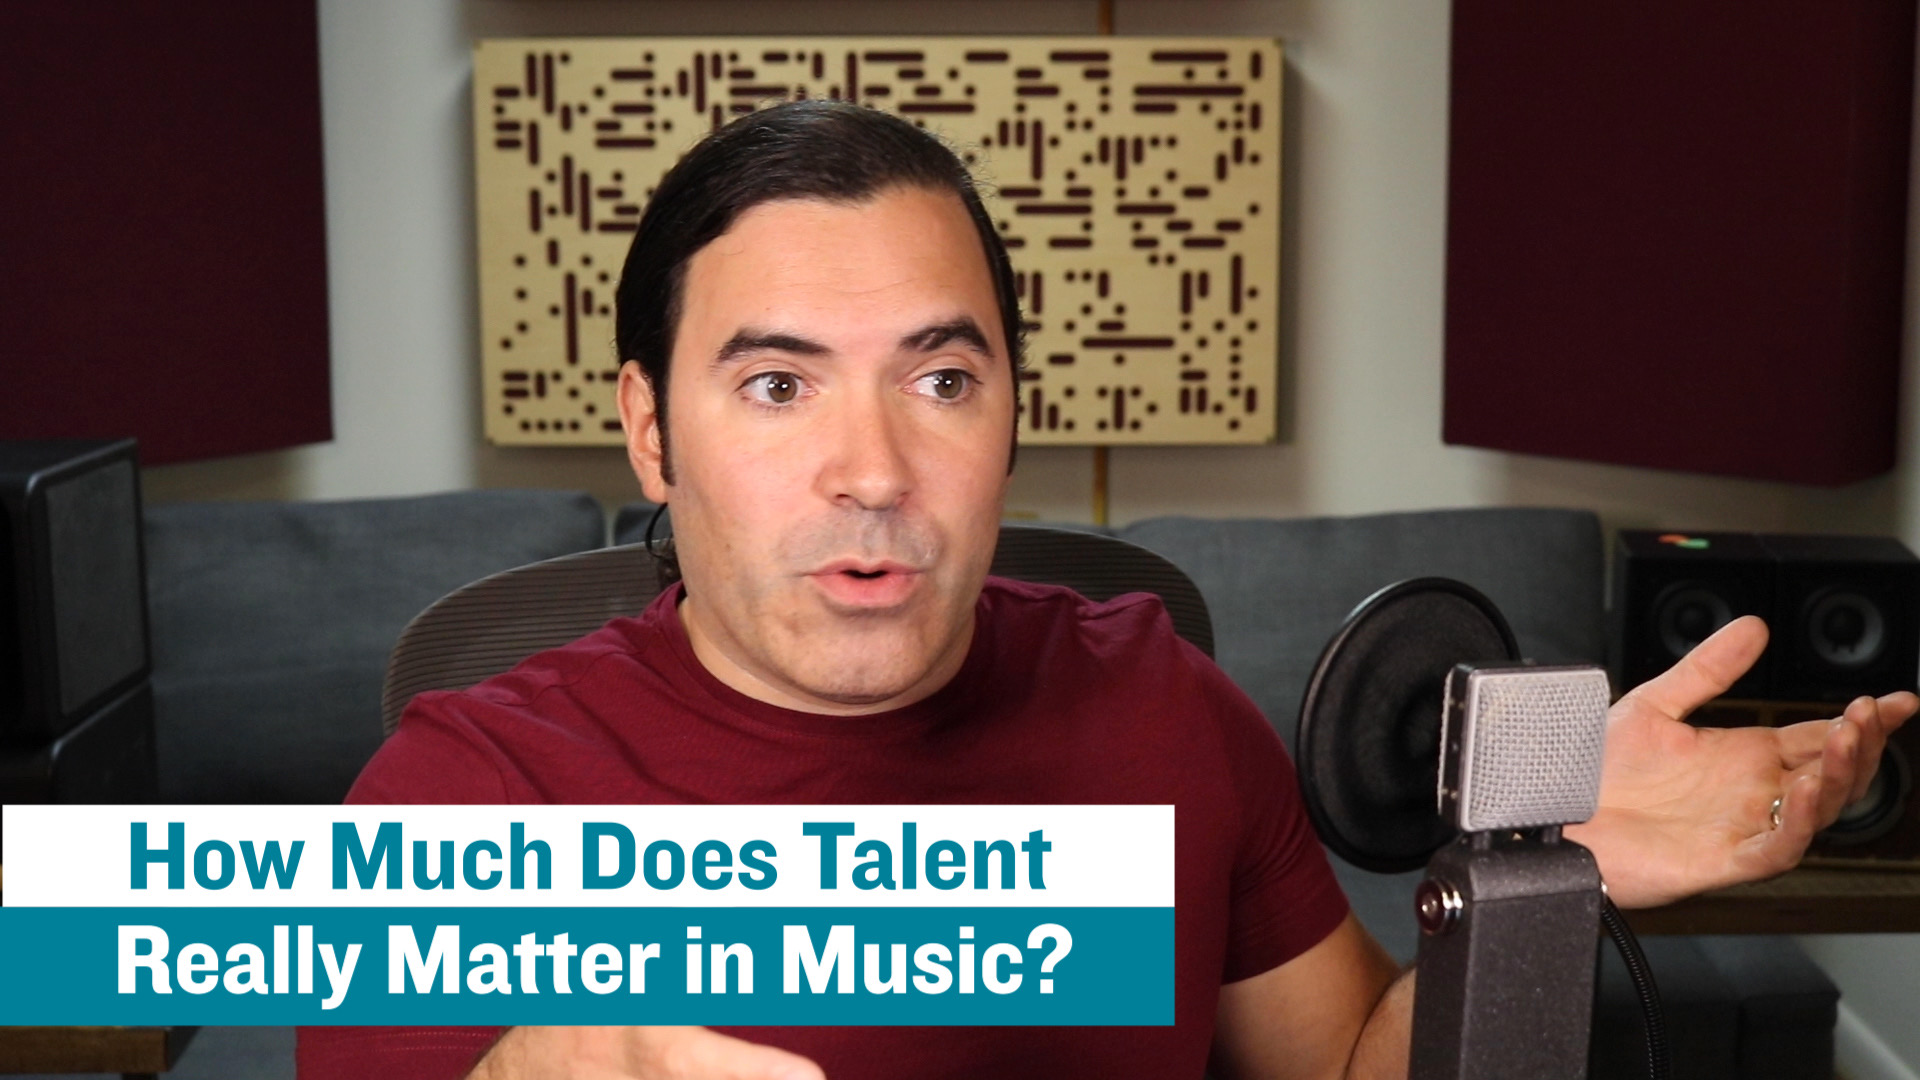 How Much Does Talent Really Matter in Music Production?